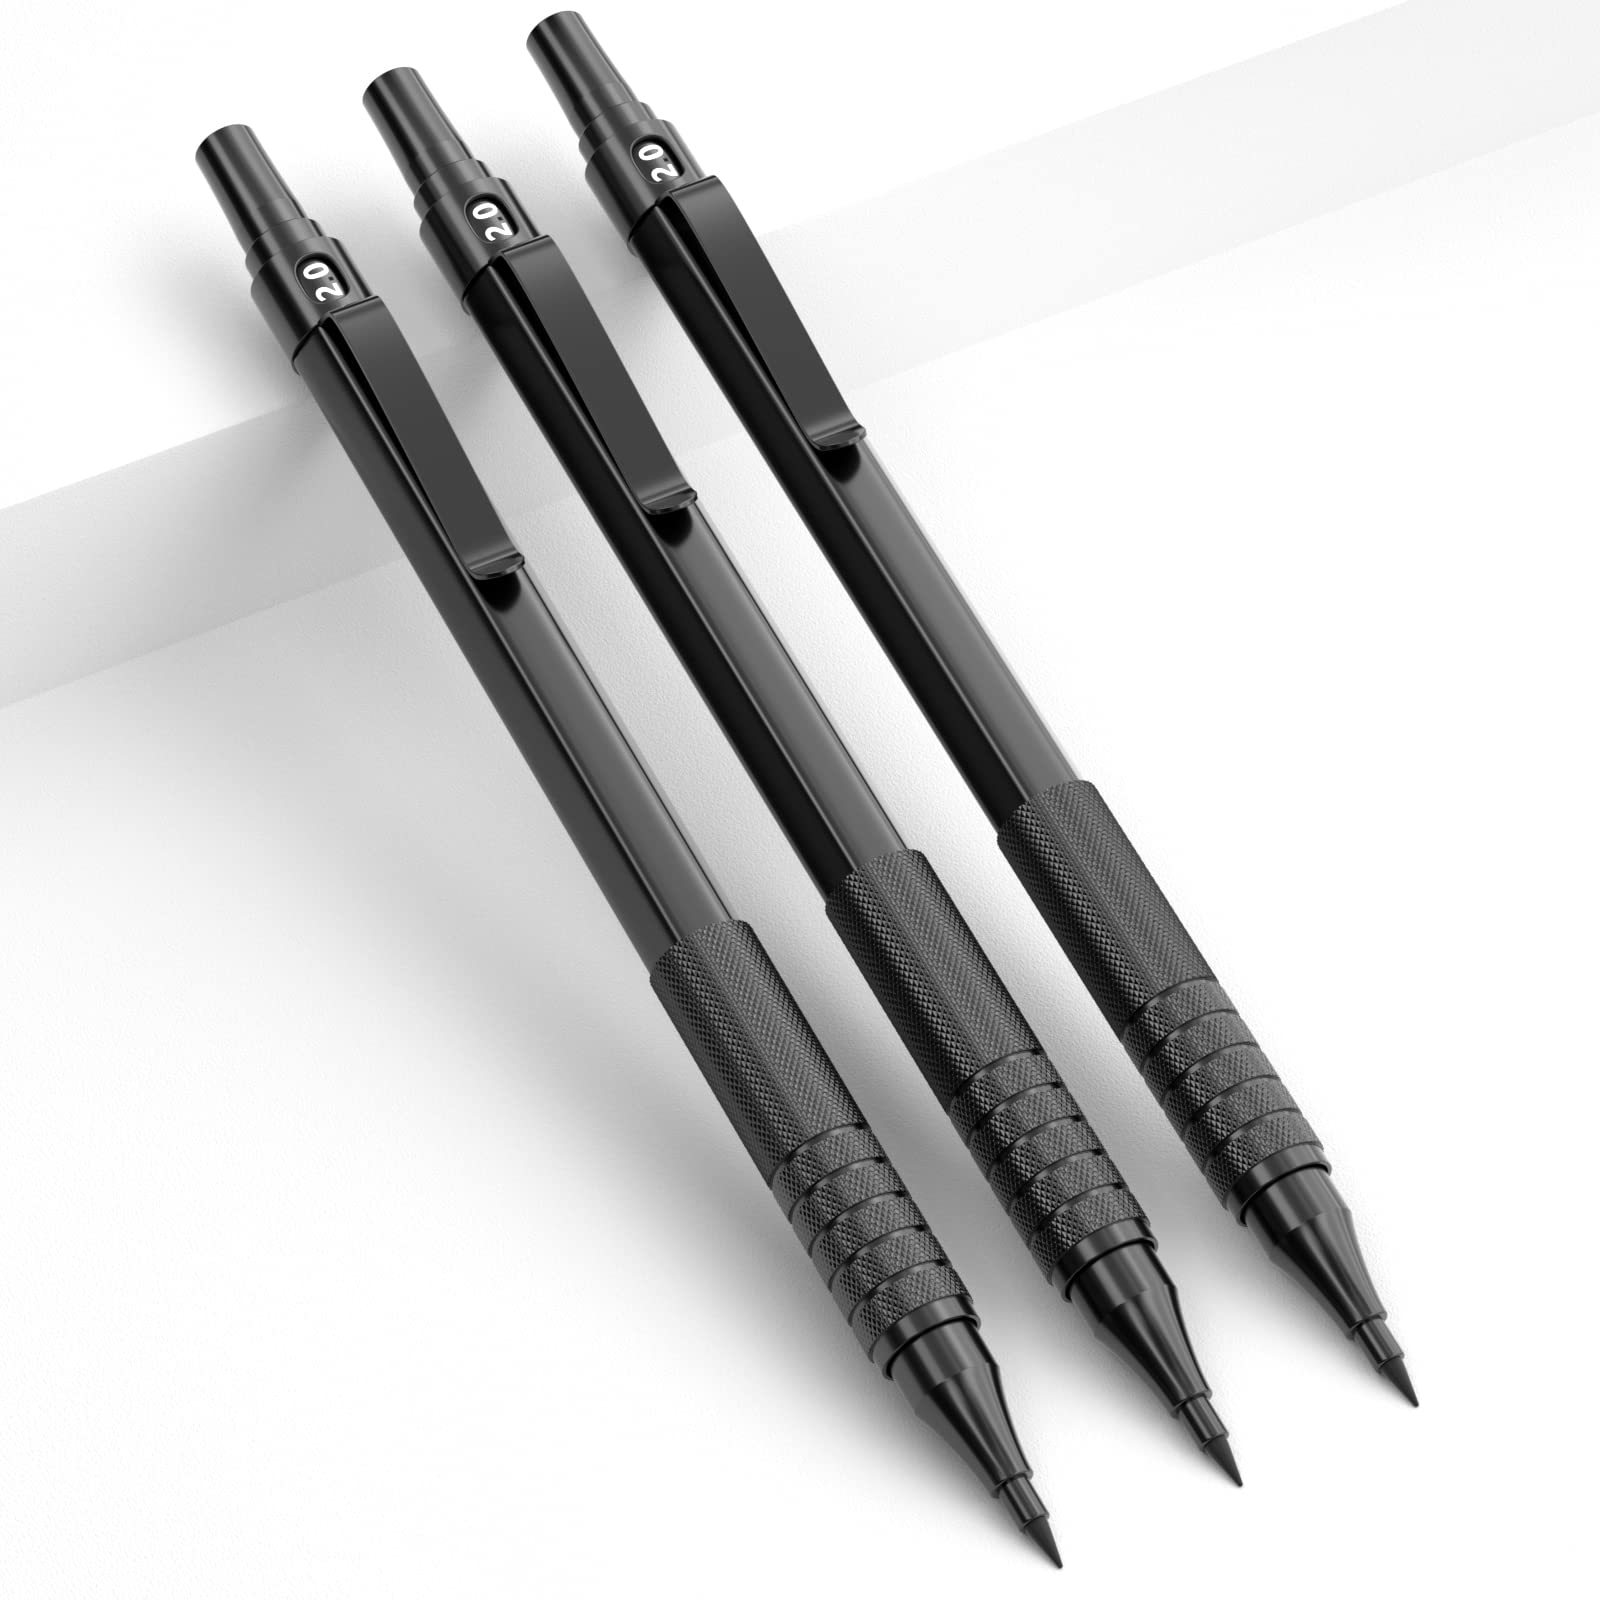 Nicpro Black Metal 2.0 Mechanical Pencil Set with Case, 3 PCS Drafting Lead Holder with 2mm Graphite Lead Refill (HB 2H 4H 2B 4B) & Colors, Sharpeners, Erasers for Artist Writing, Drawing, Sketching